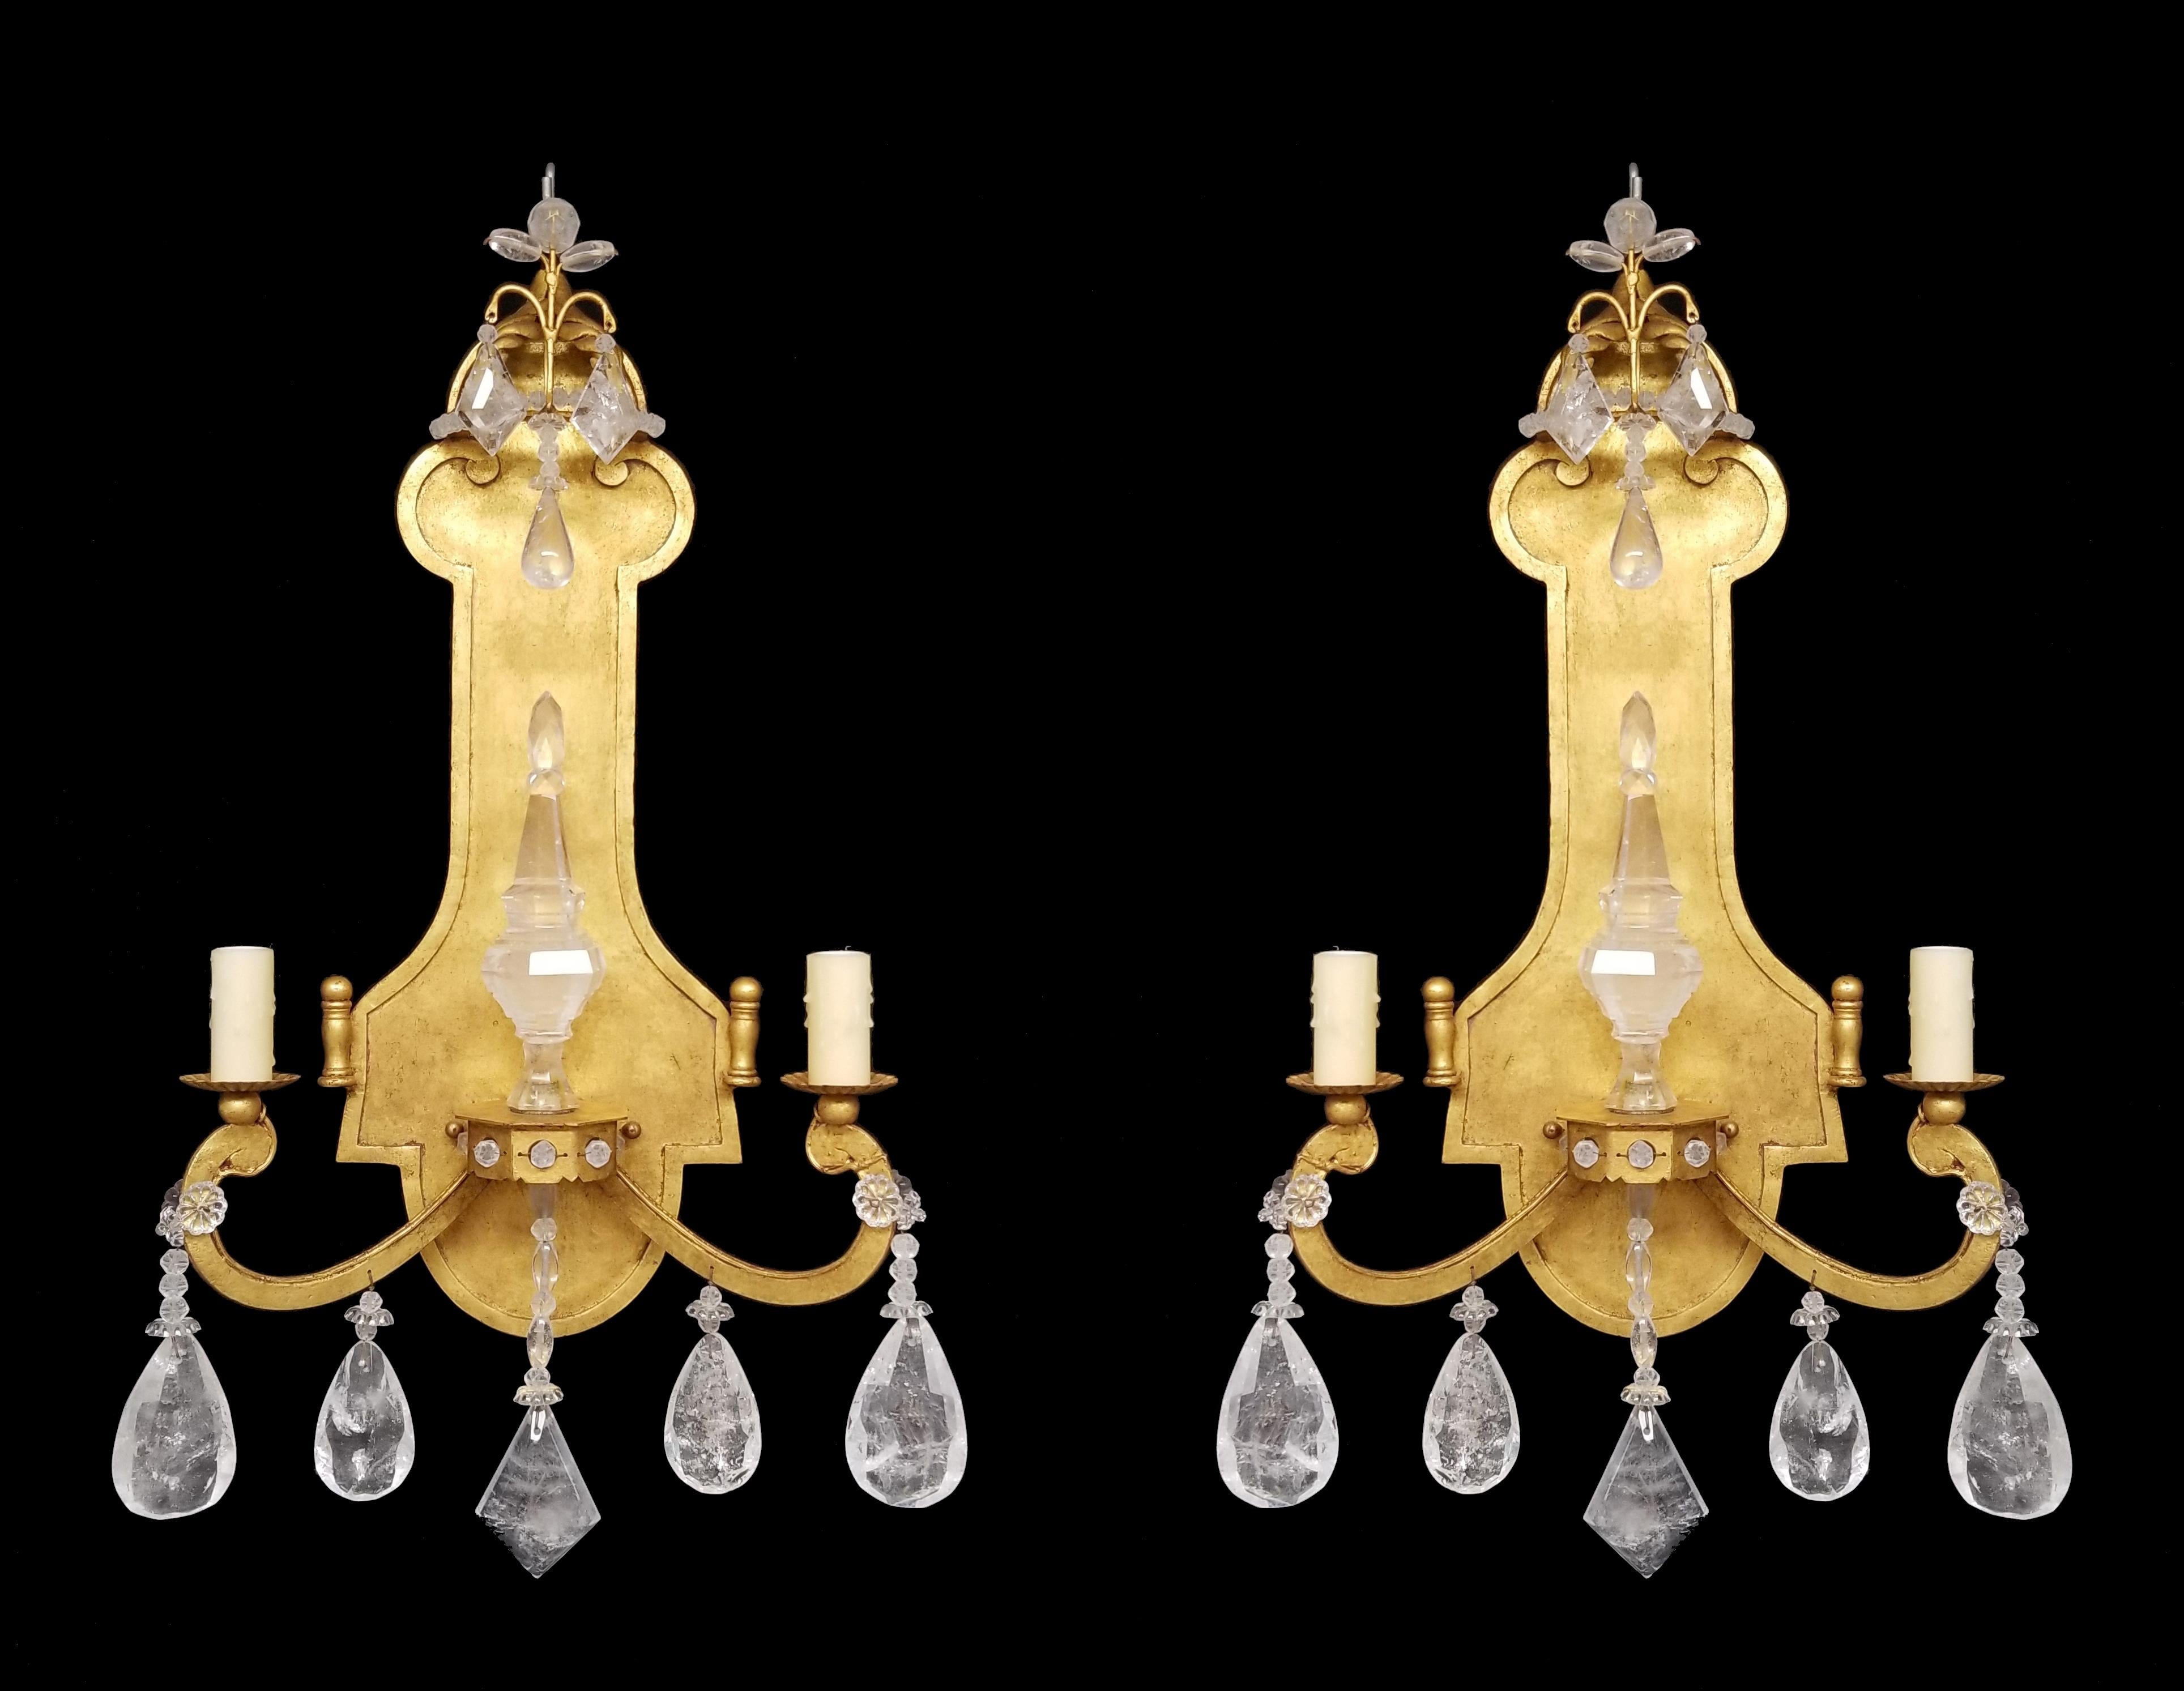 Charming pair of gold leafed hand forged wrought iron two light sconces with Rock crystal prisms and large rock crystal spike in the center. 
They are sensational.
They come in two sizes:
H. 26